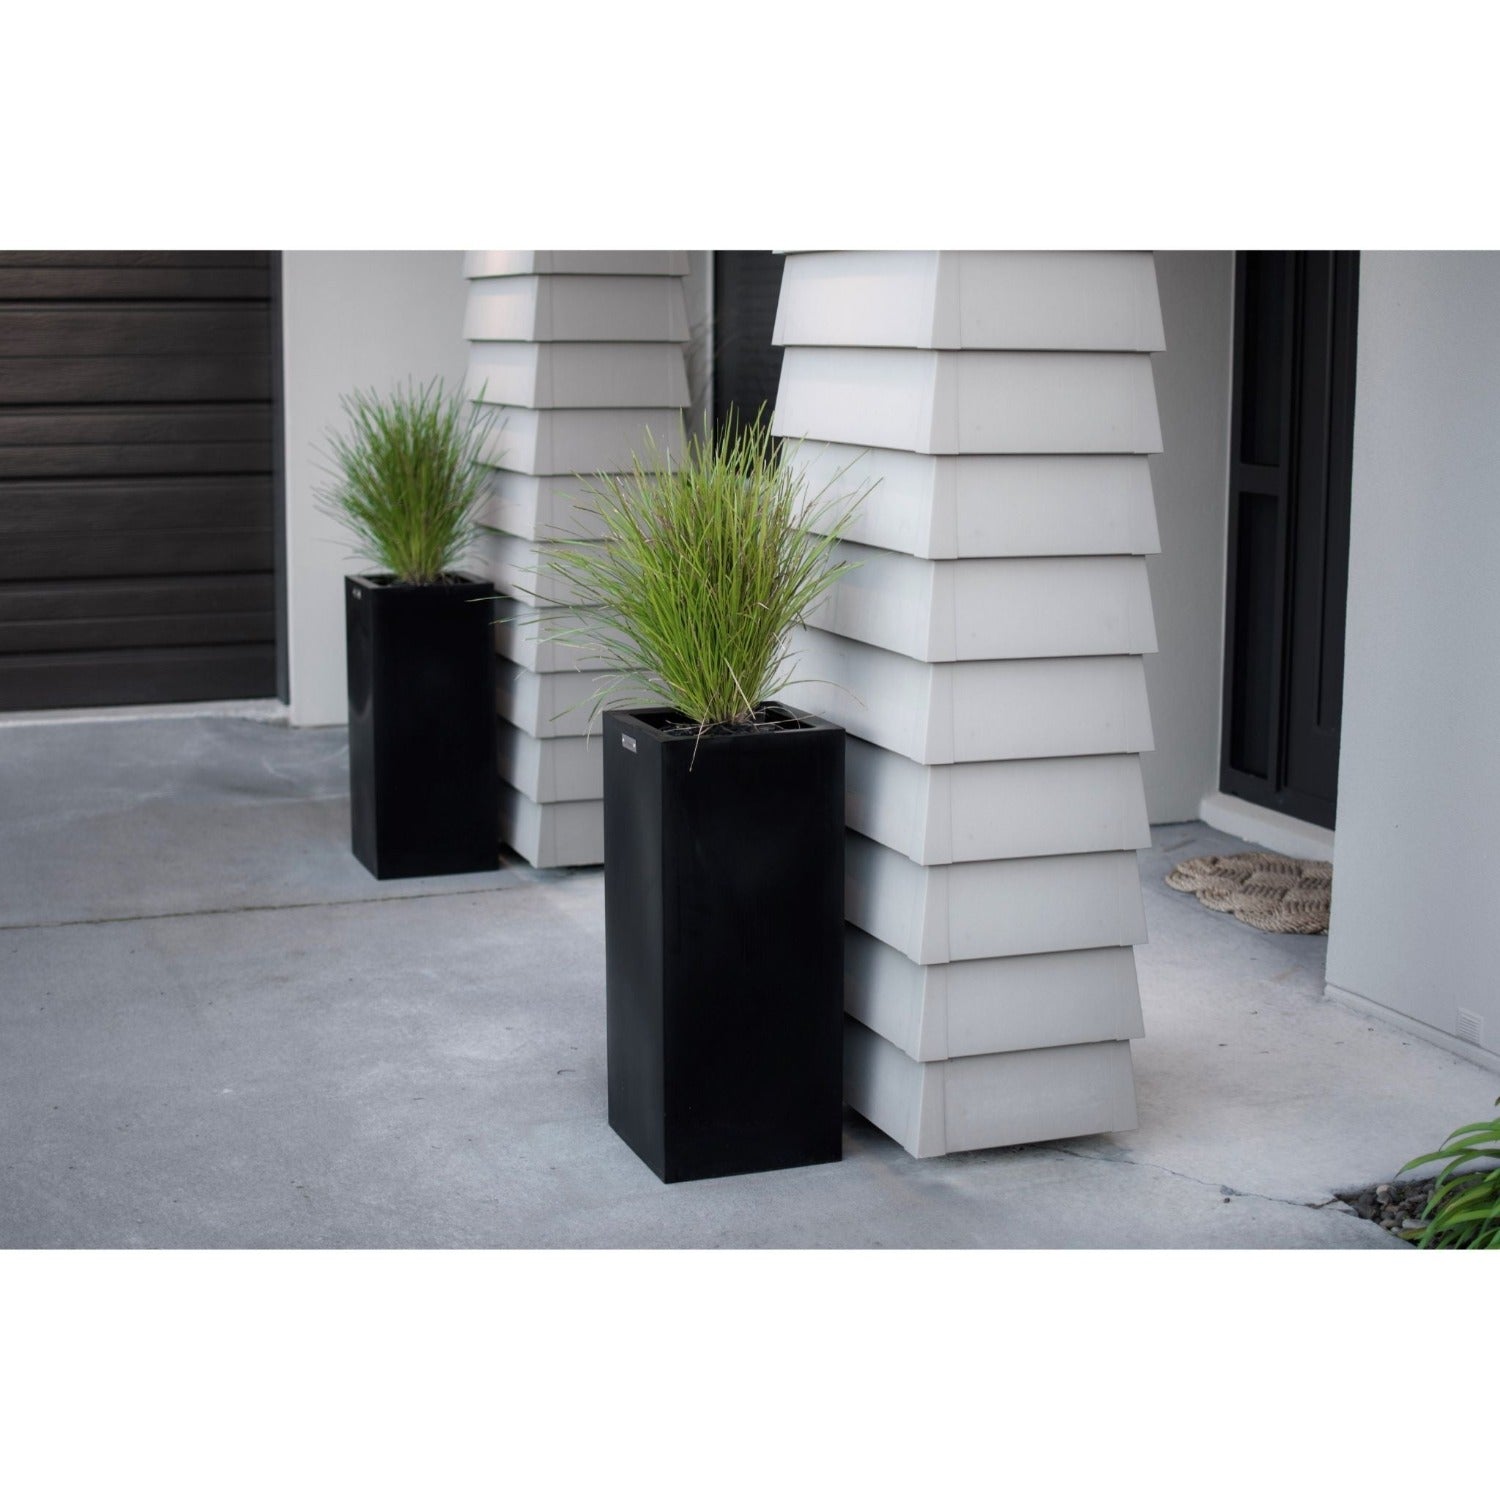 Two black planter pots planted with grasses.